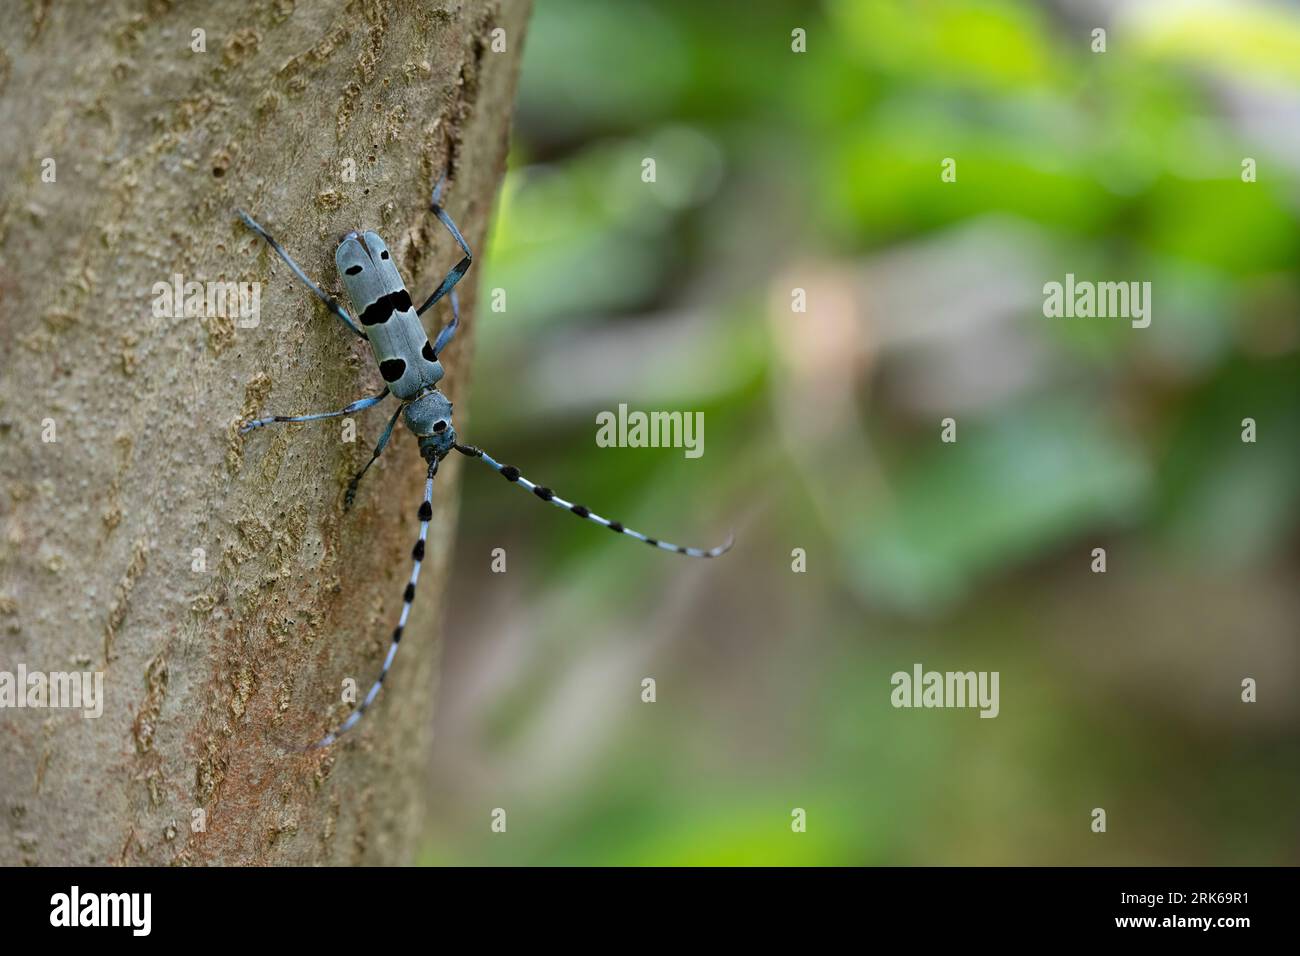 A close-up image of an arthropod perched on the bark of a tree trunk Stock Photo